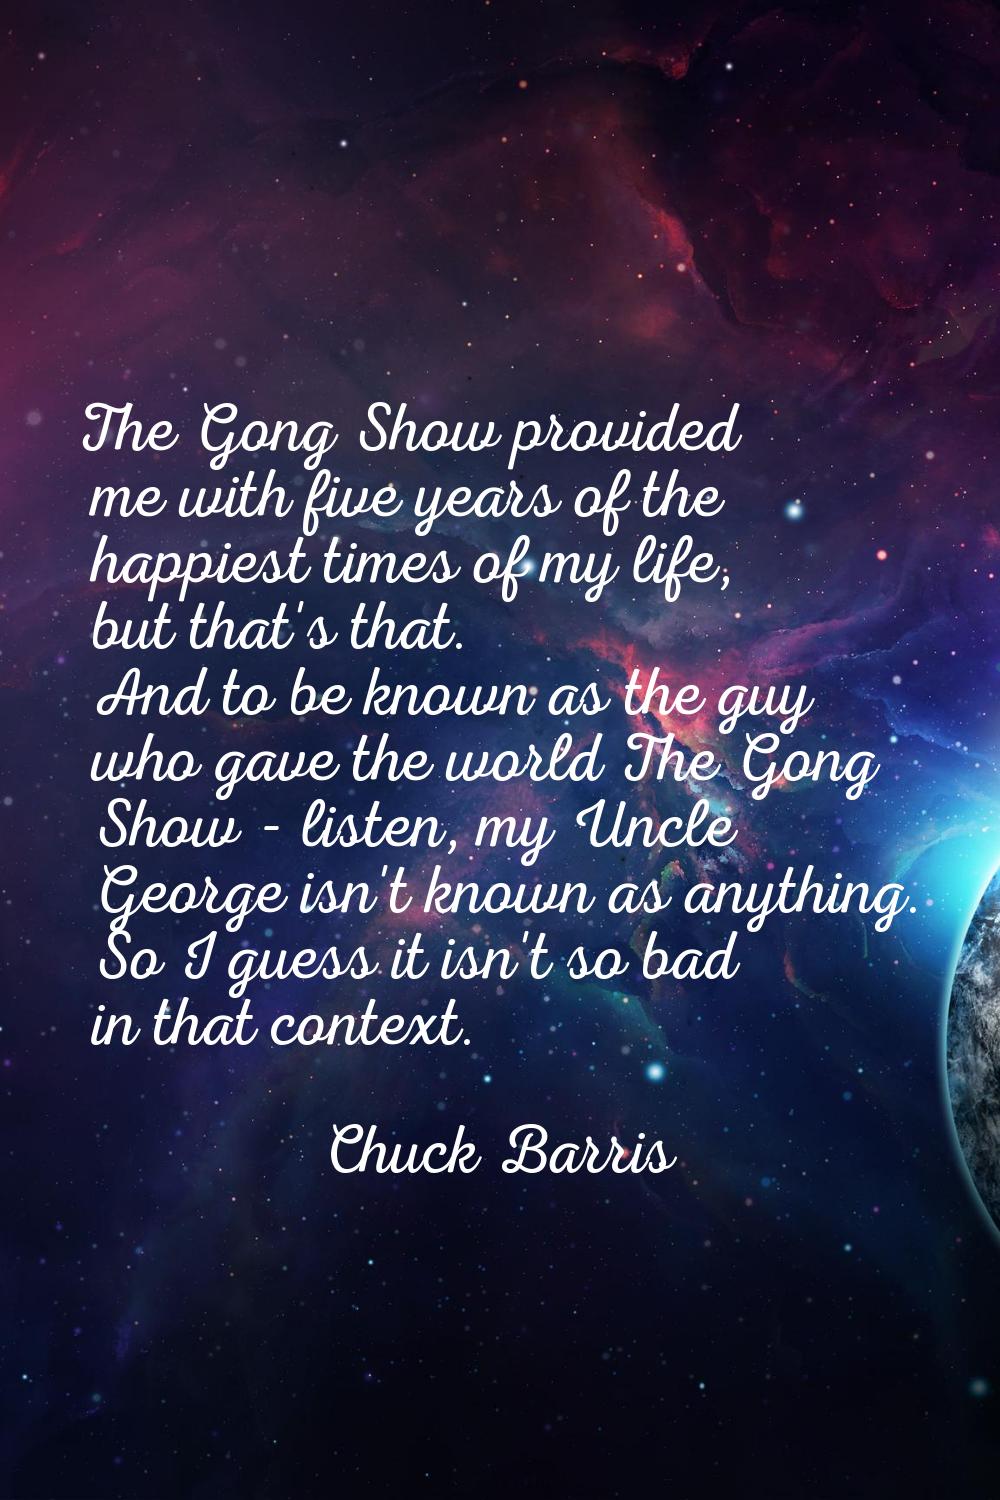 The Gong Show provided me with five years of the happiest times of my life, but that's that. And to